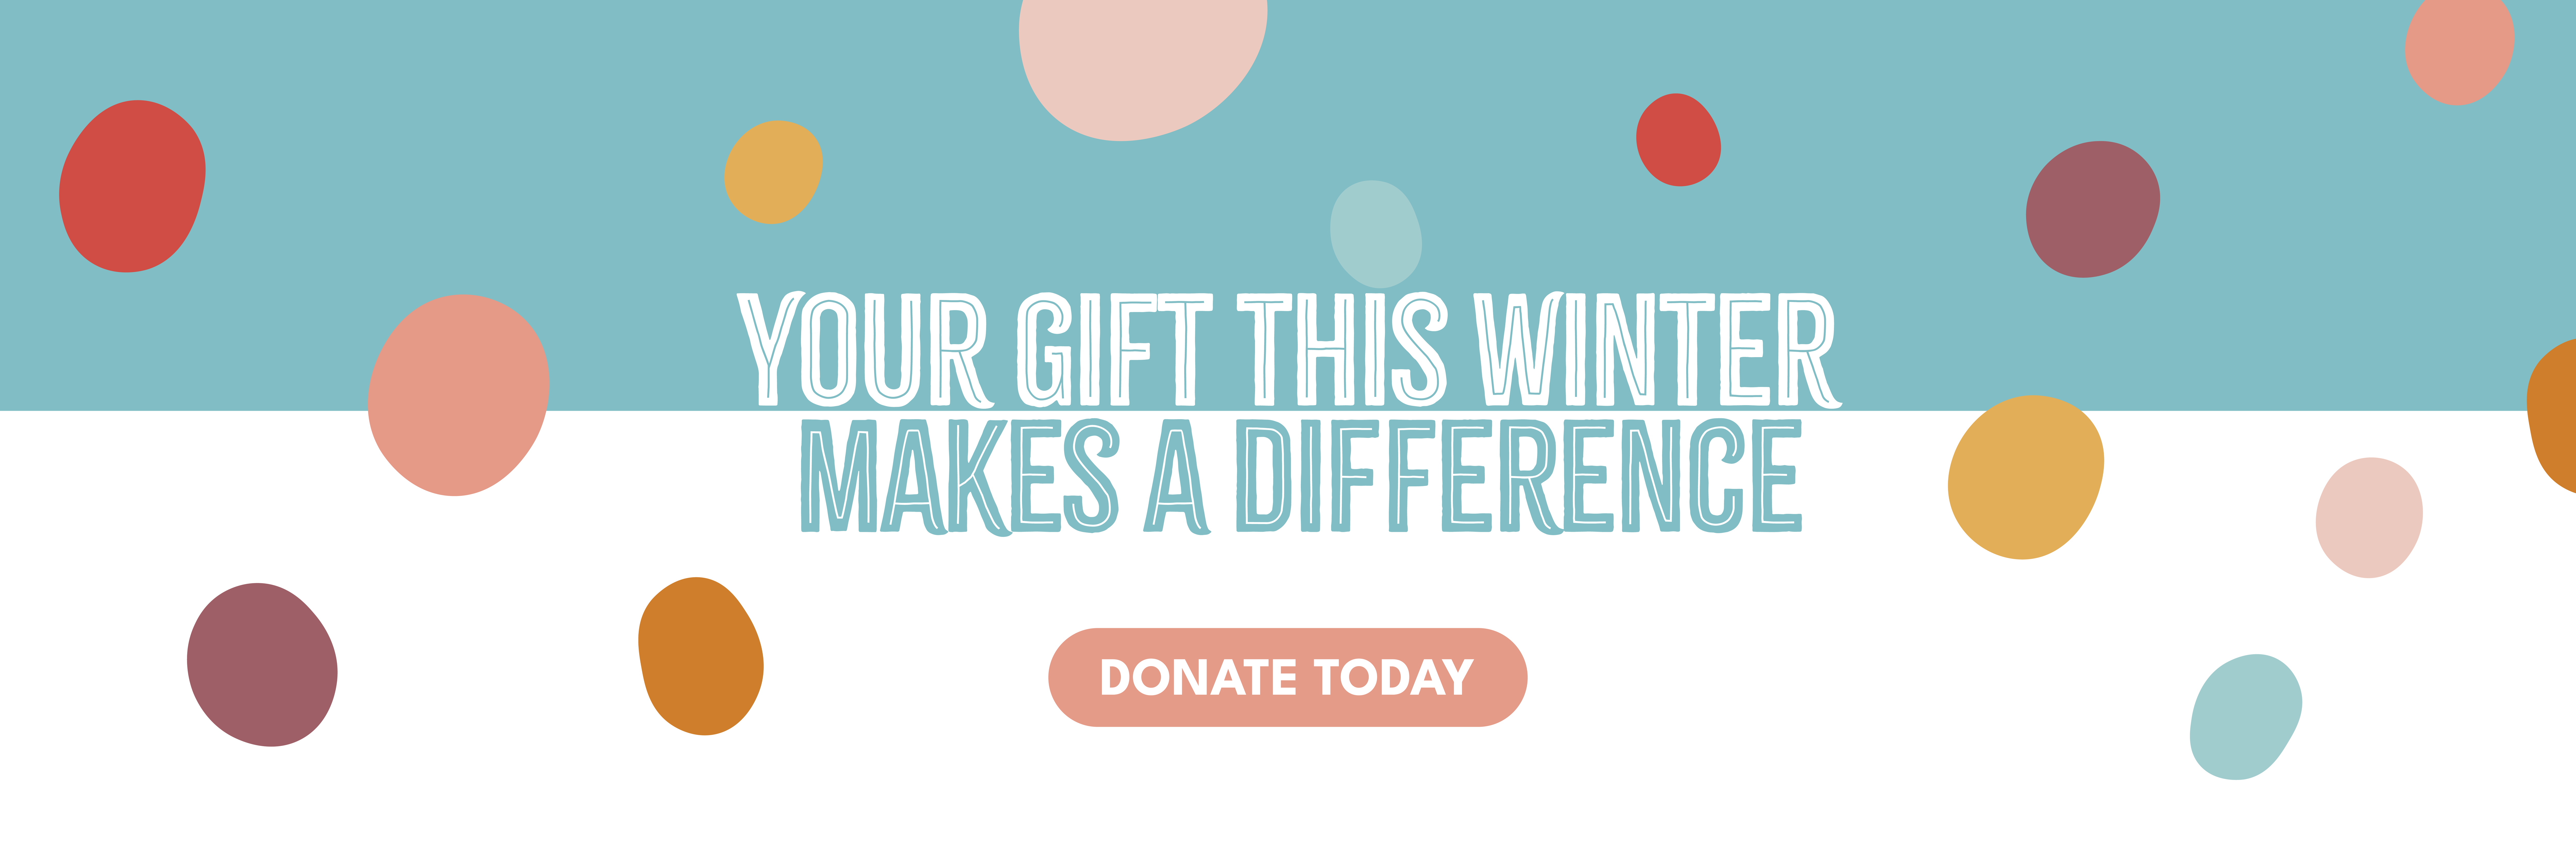 poster with text on it: Your gift this winter makes a difference, and a pink button below it that says Donate today